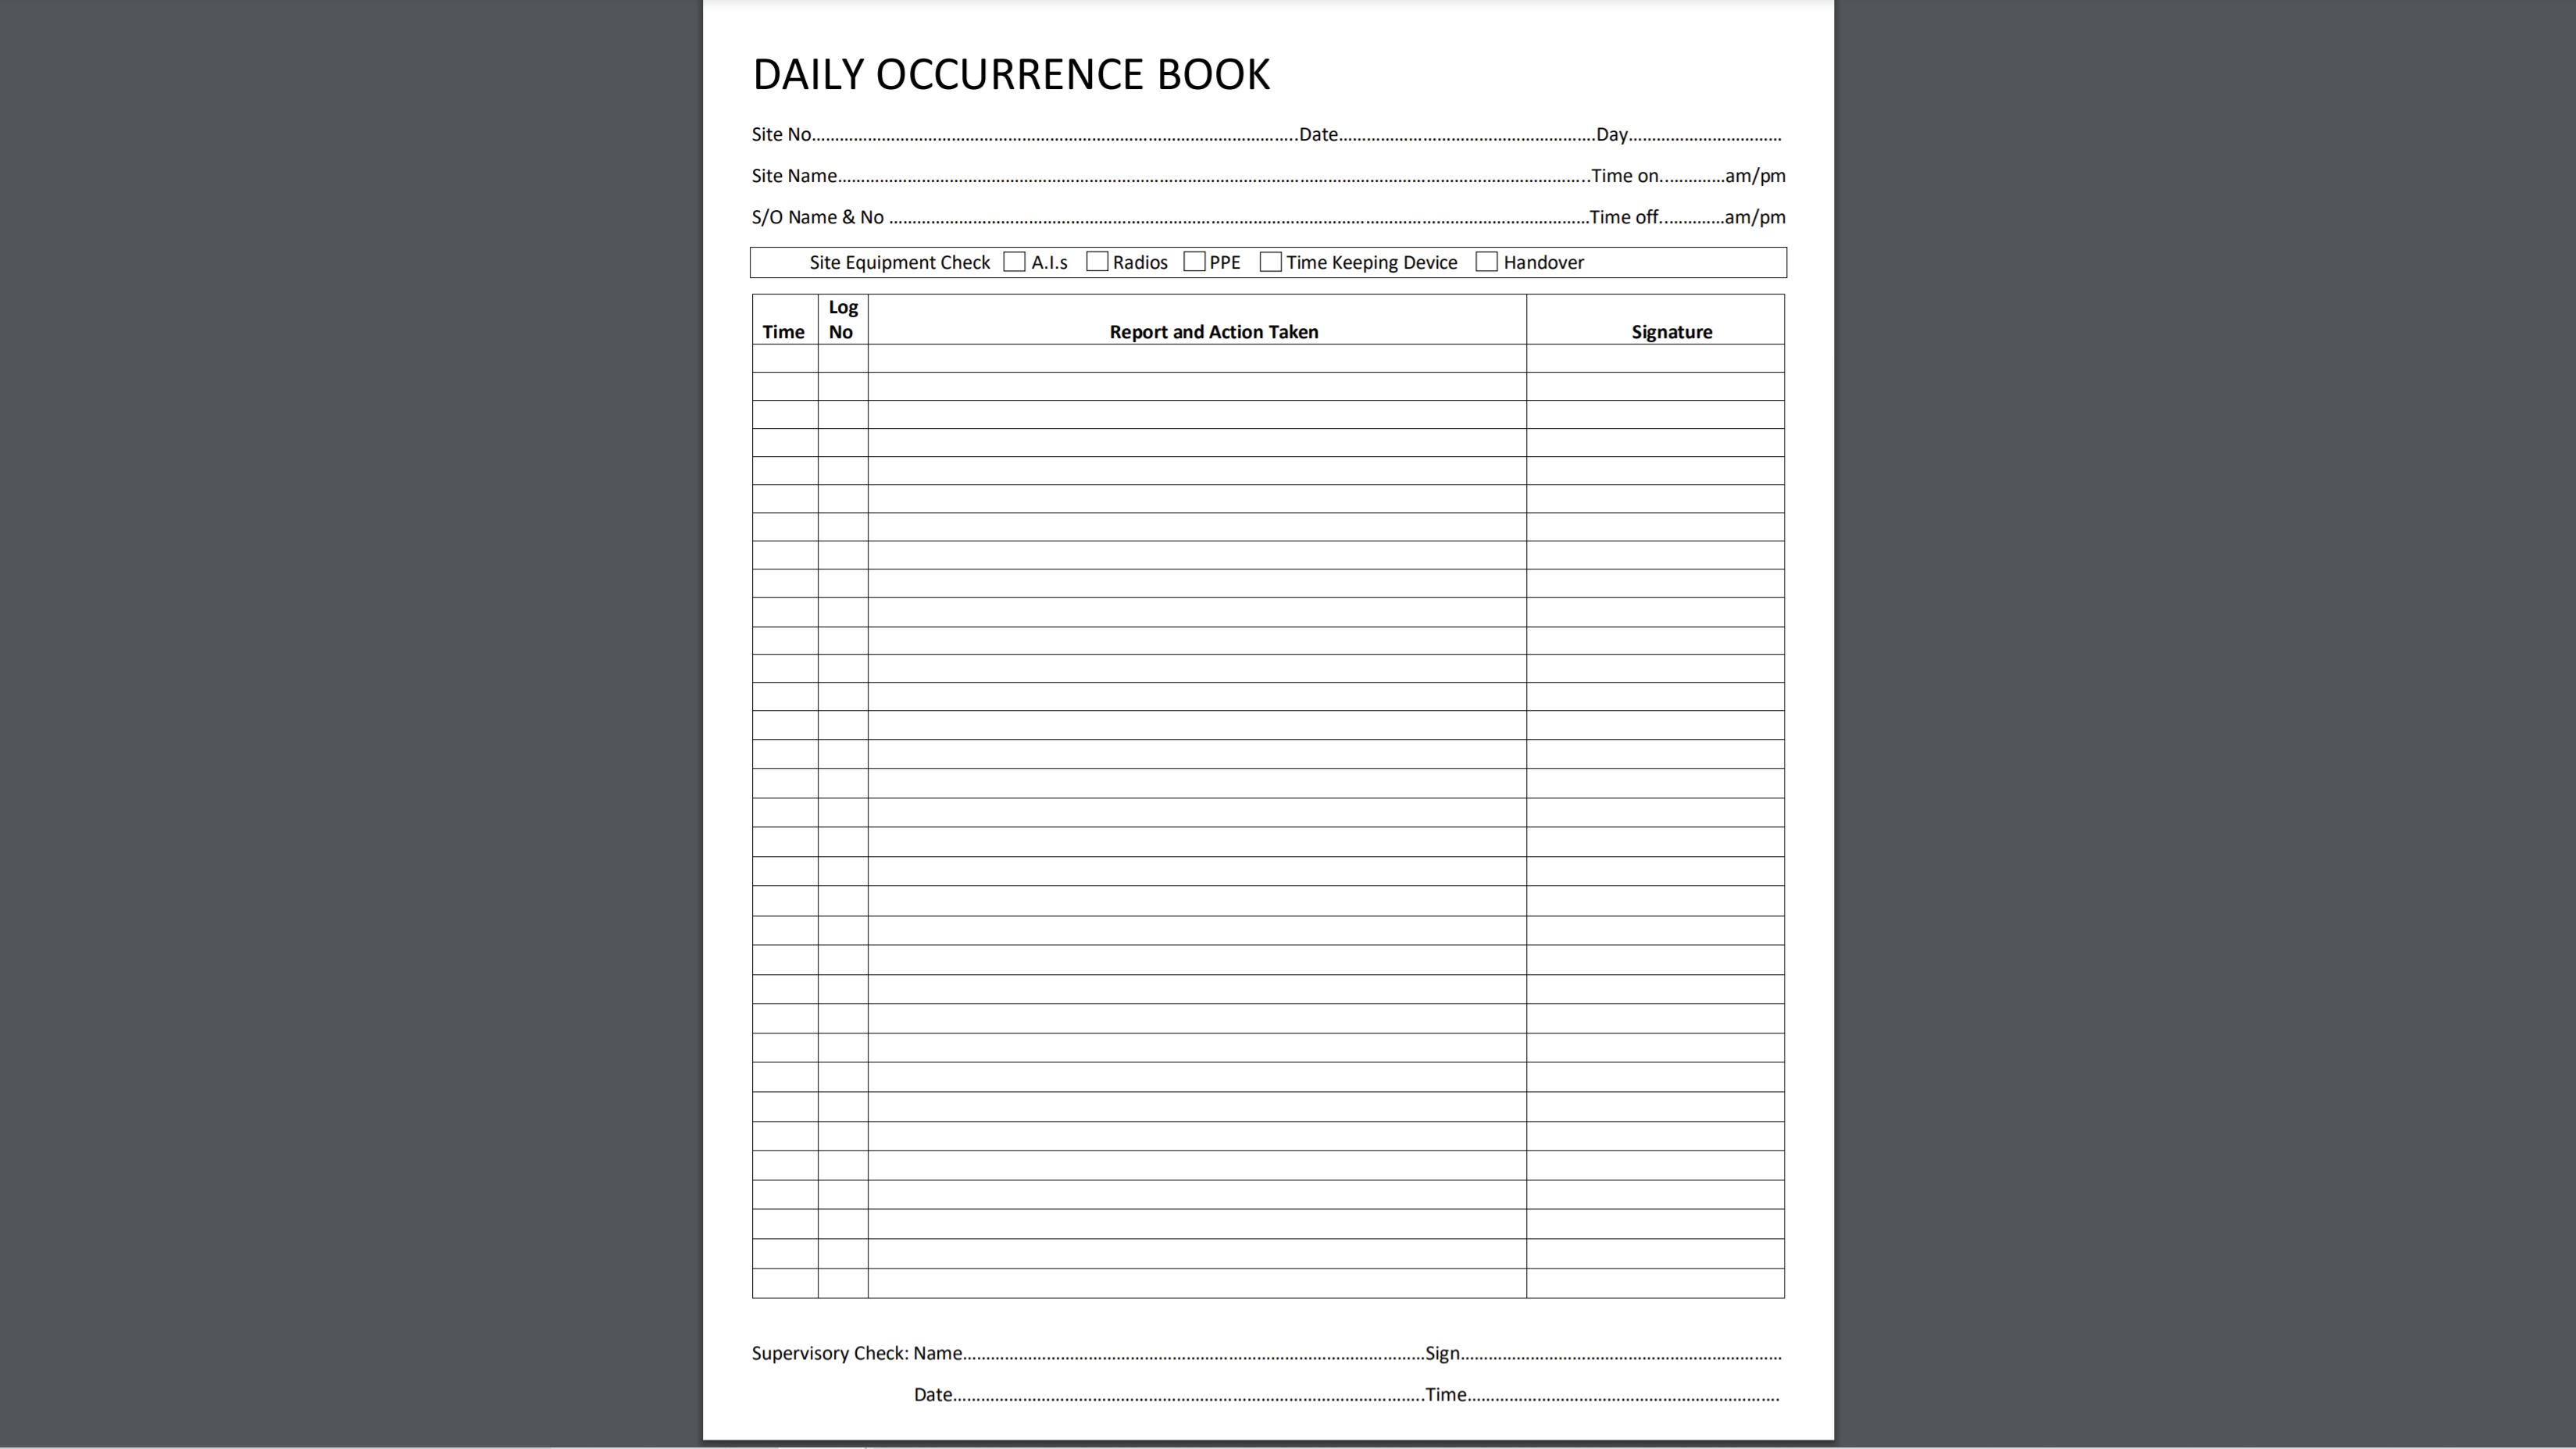 How to write a daily occurrence book report - Sample occurrence book